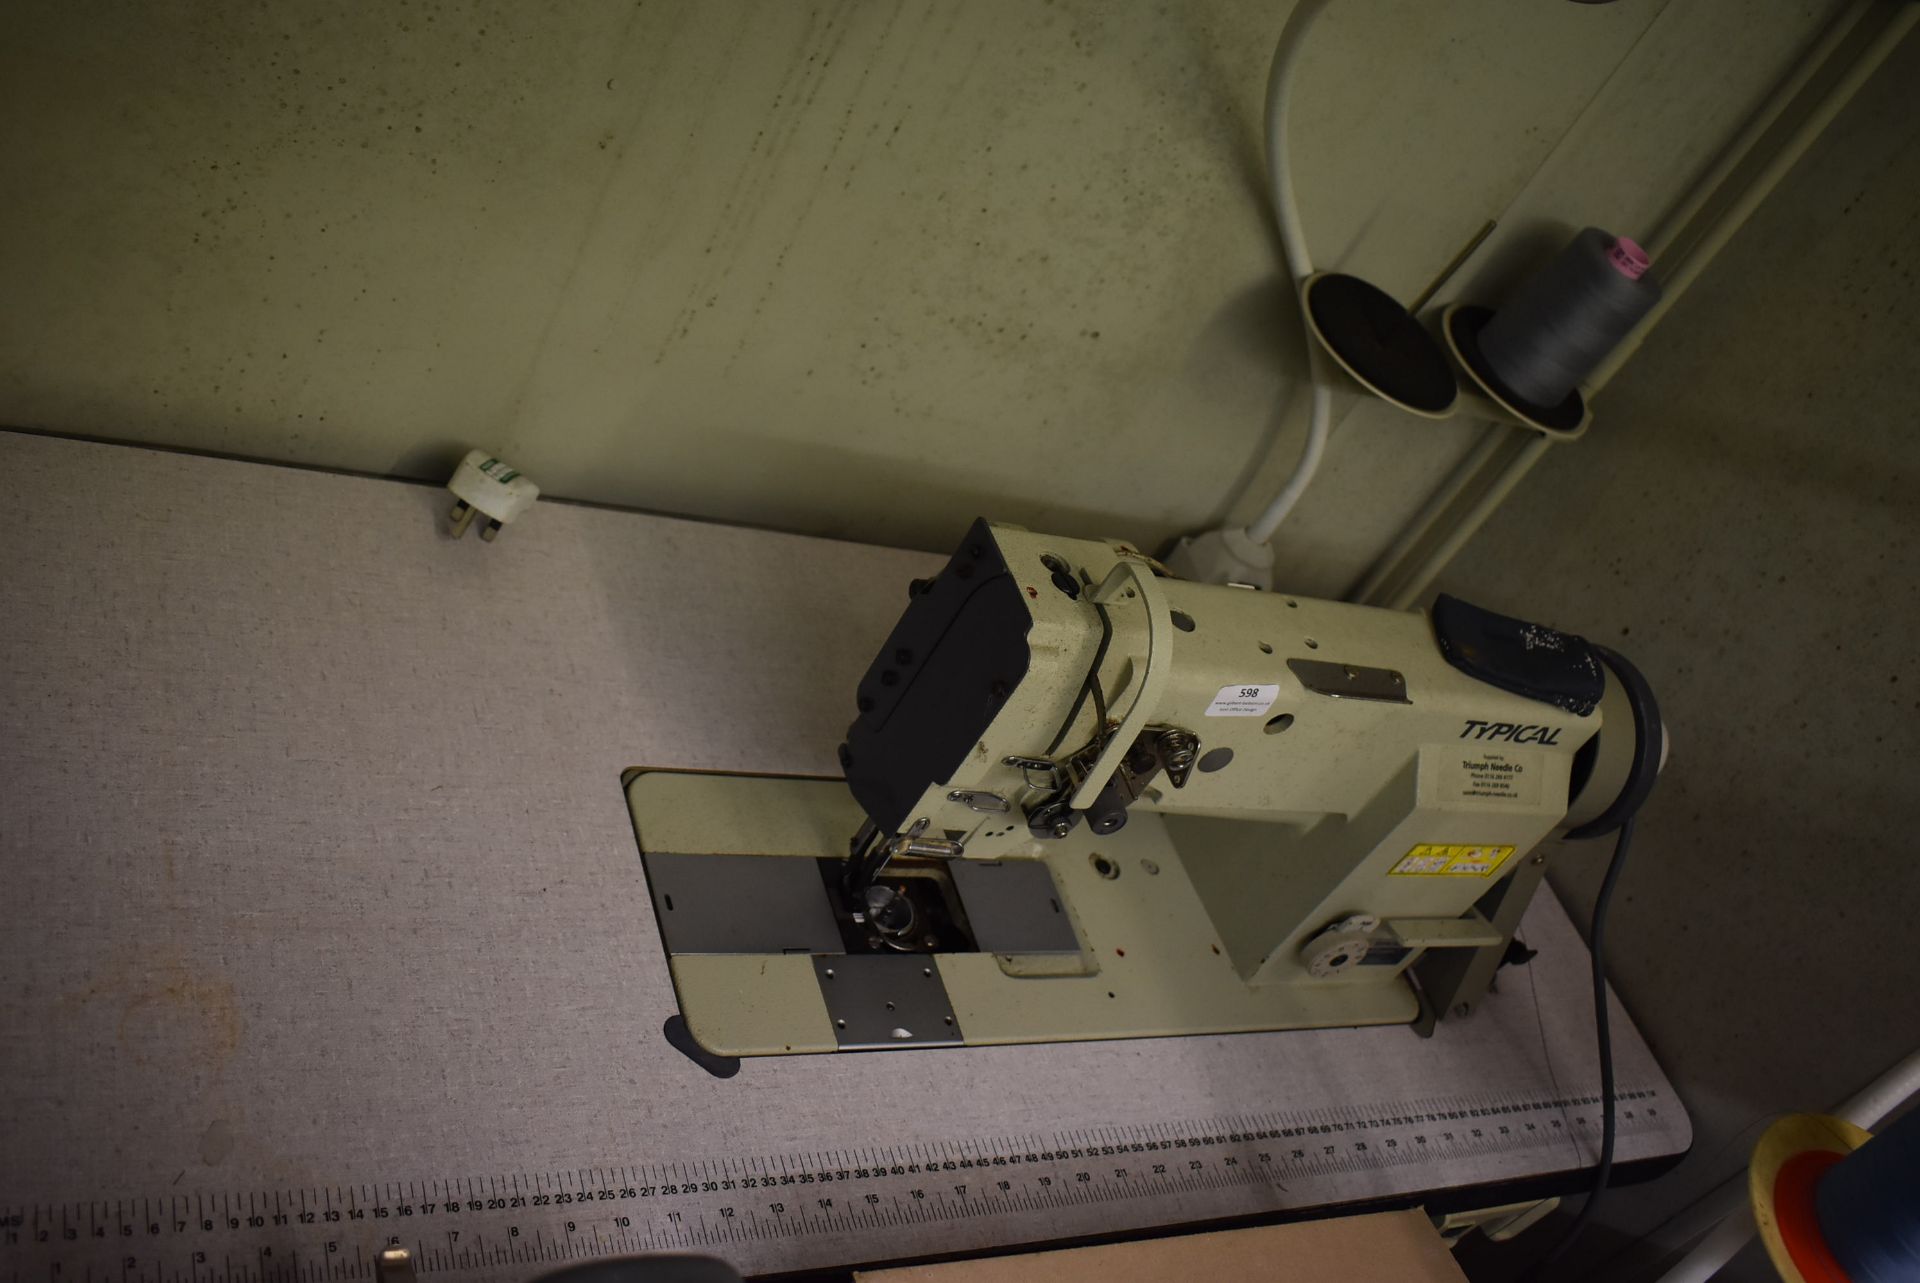 *Typical GC20606-1 Sewing Machine on Bench